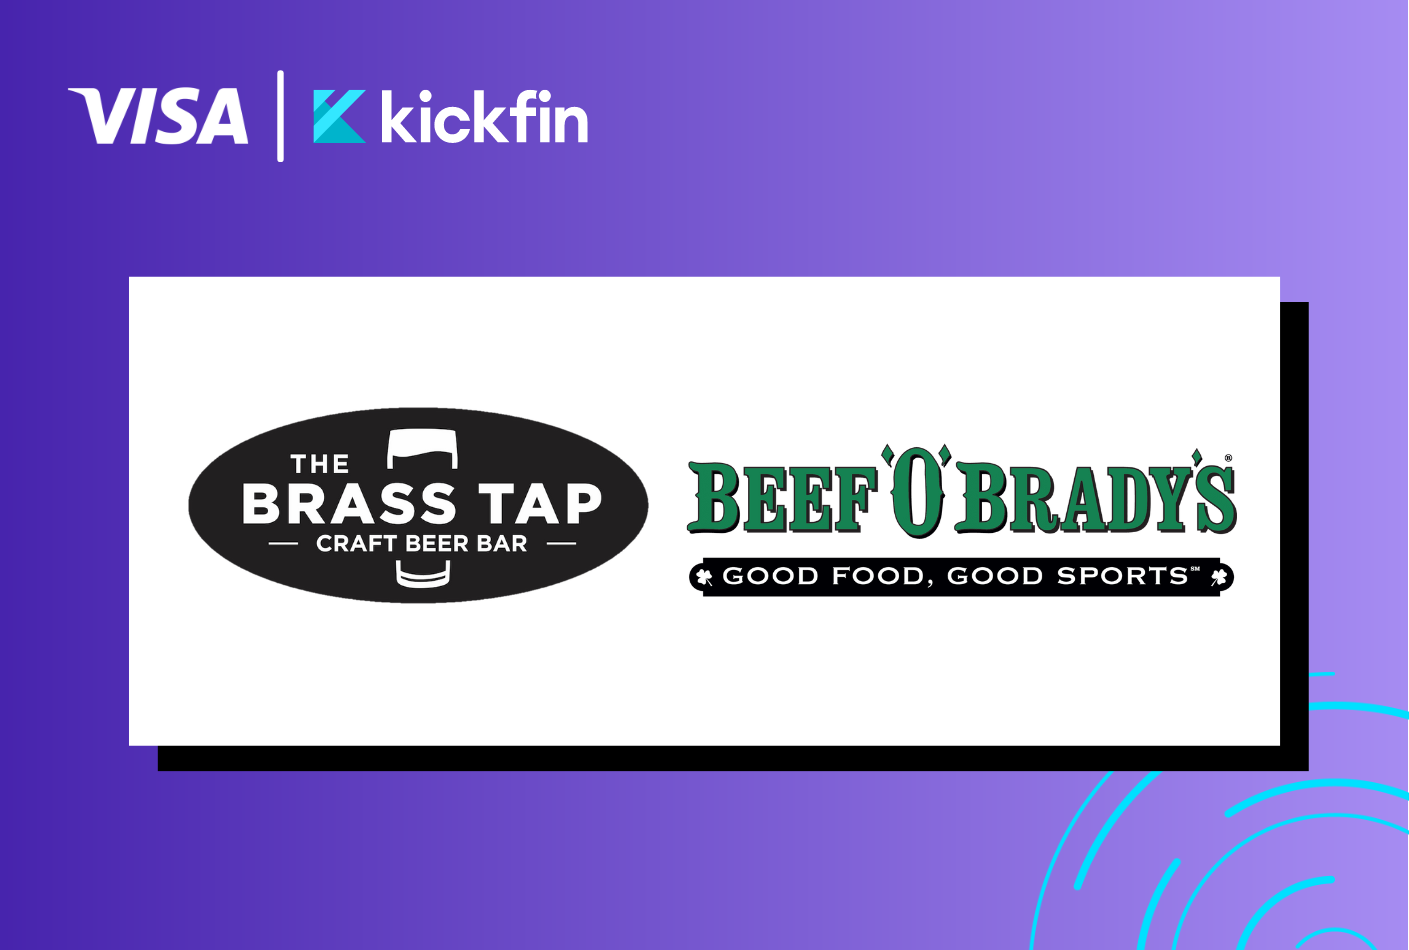 The Brass Tap/Beef ‘O’ Brady’s Partners with Kickfin and Visa Direct to Enable Cashless Tip-outs for Employees